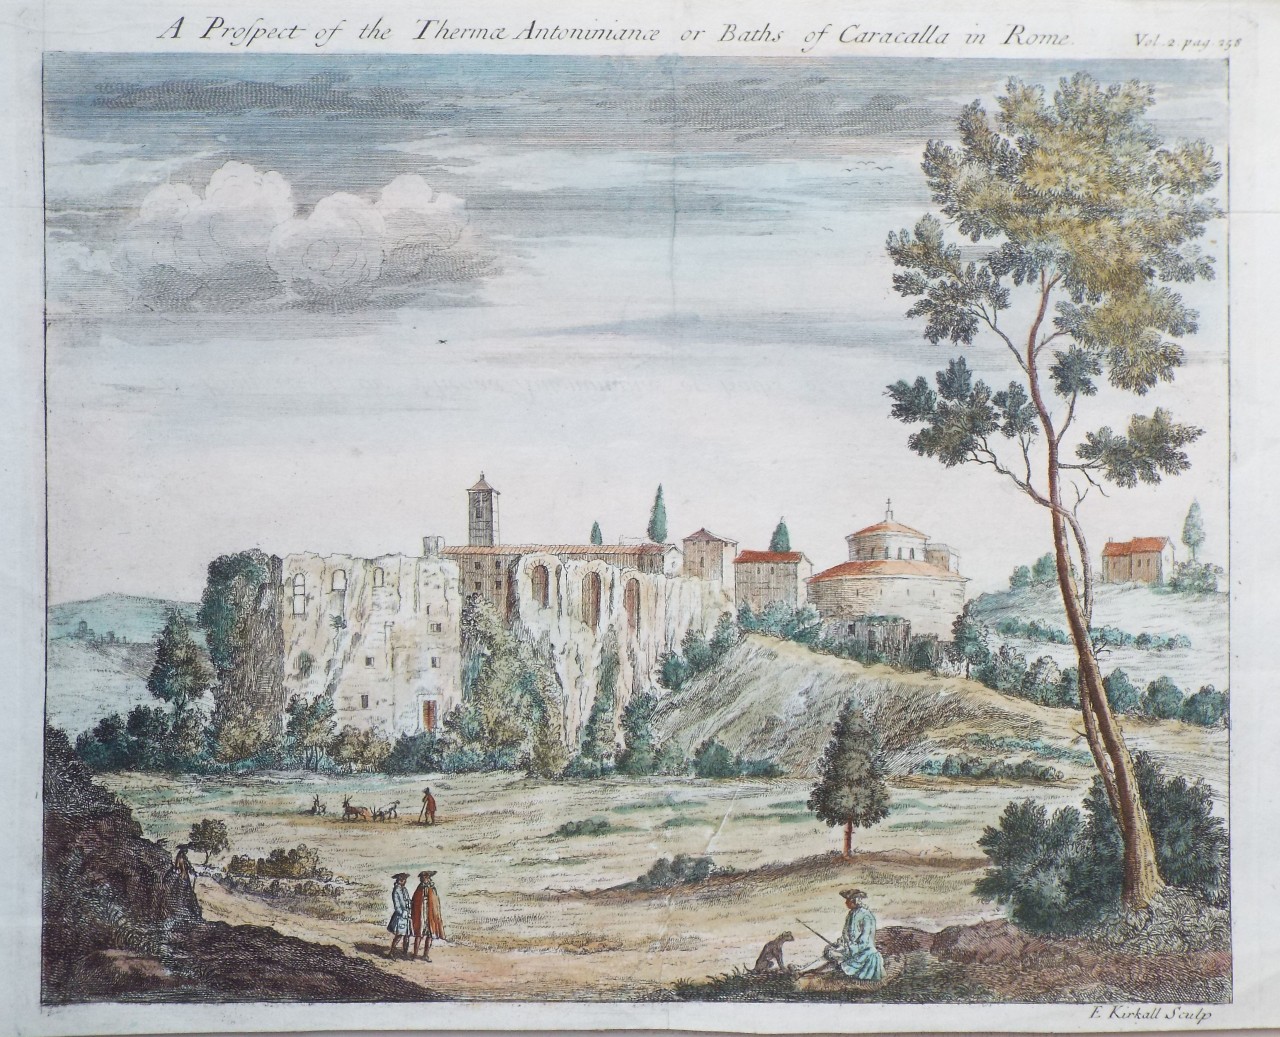 Print - A Prospect of the Thermae Antoninianae or Baths of Caracalla in Rome.Rome ruins - Kirkall